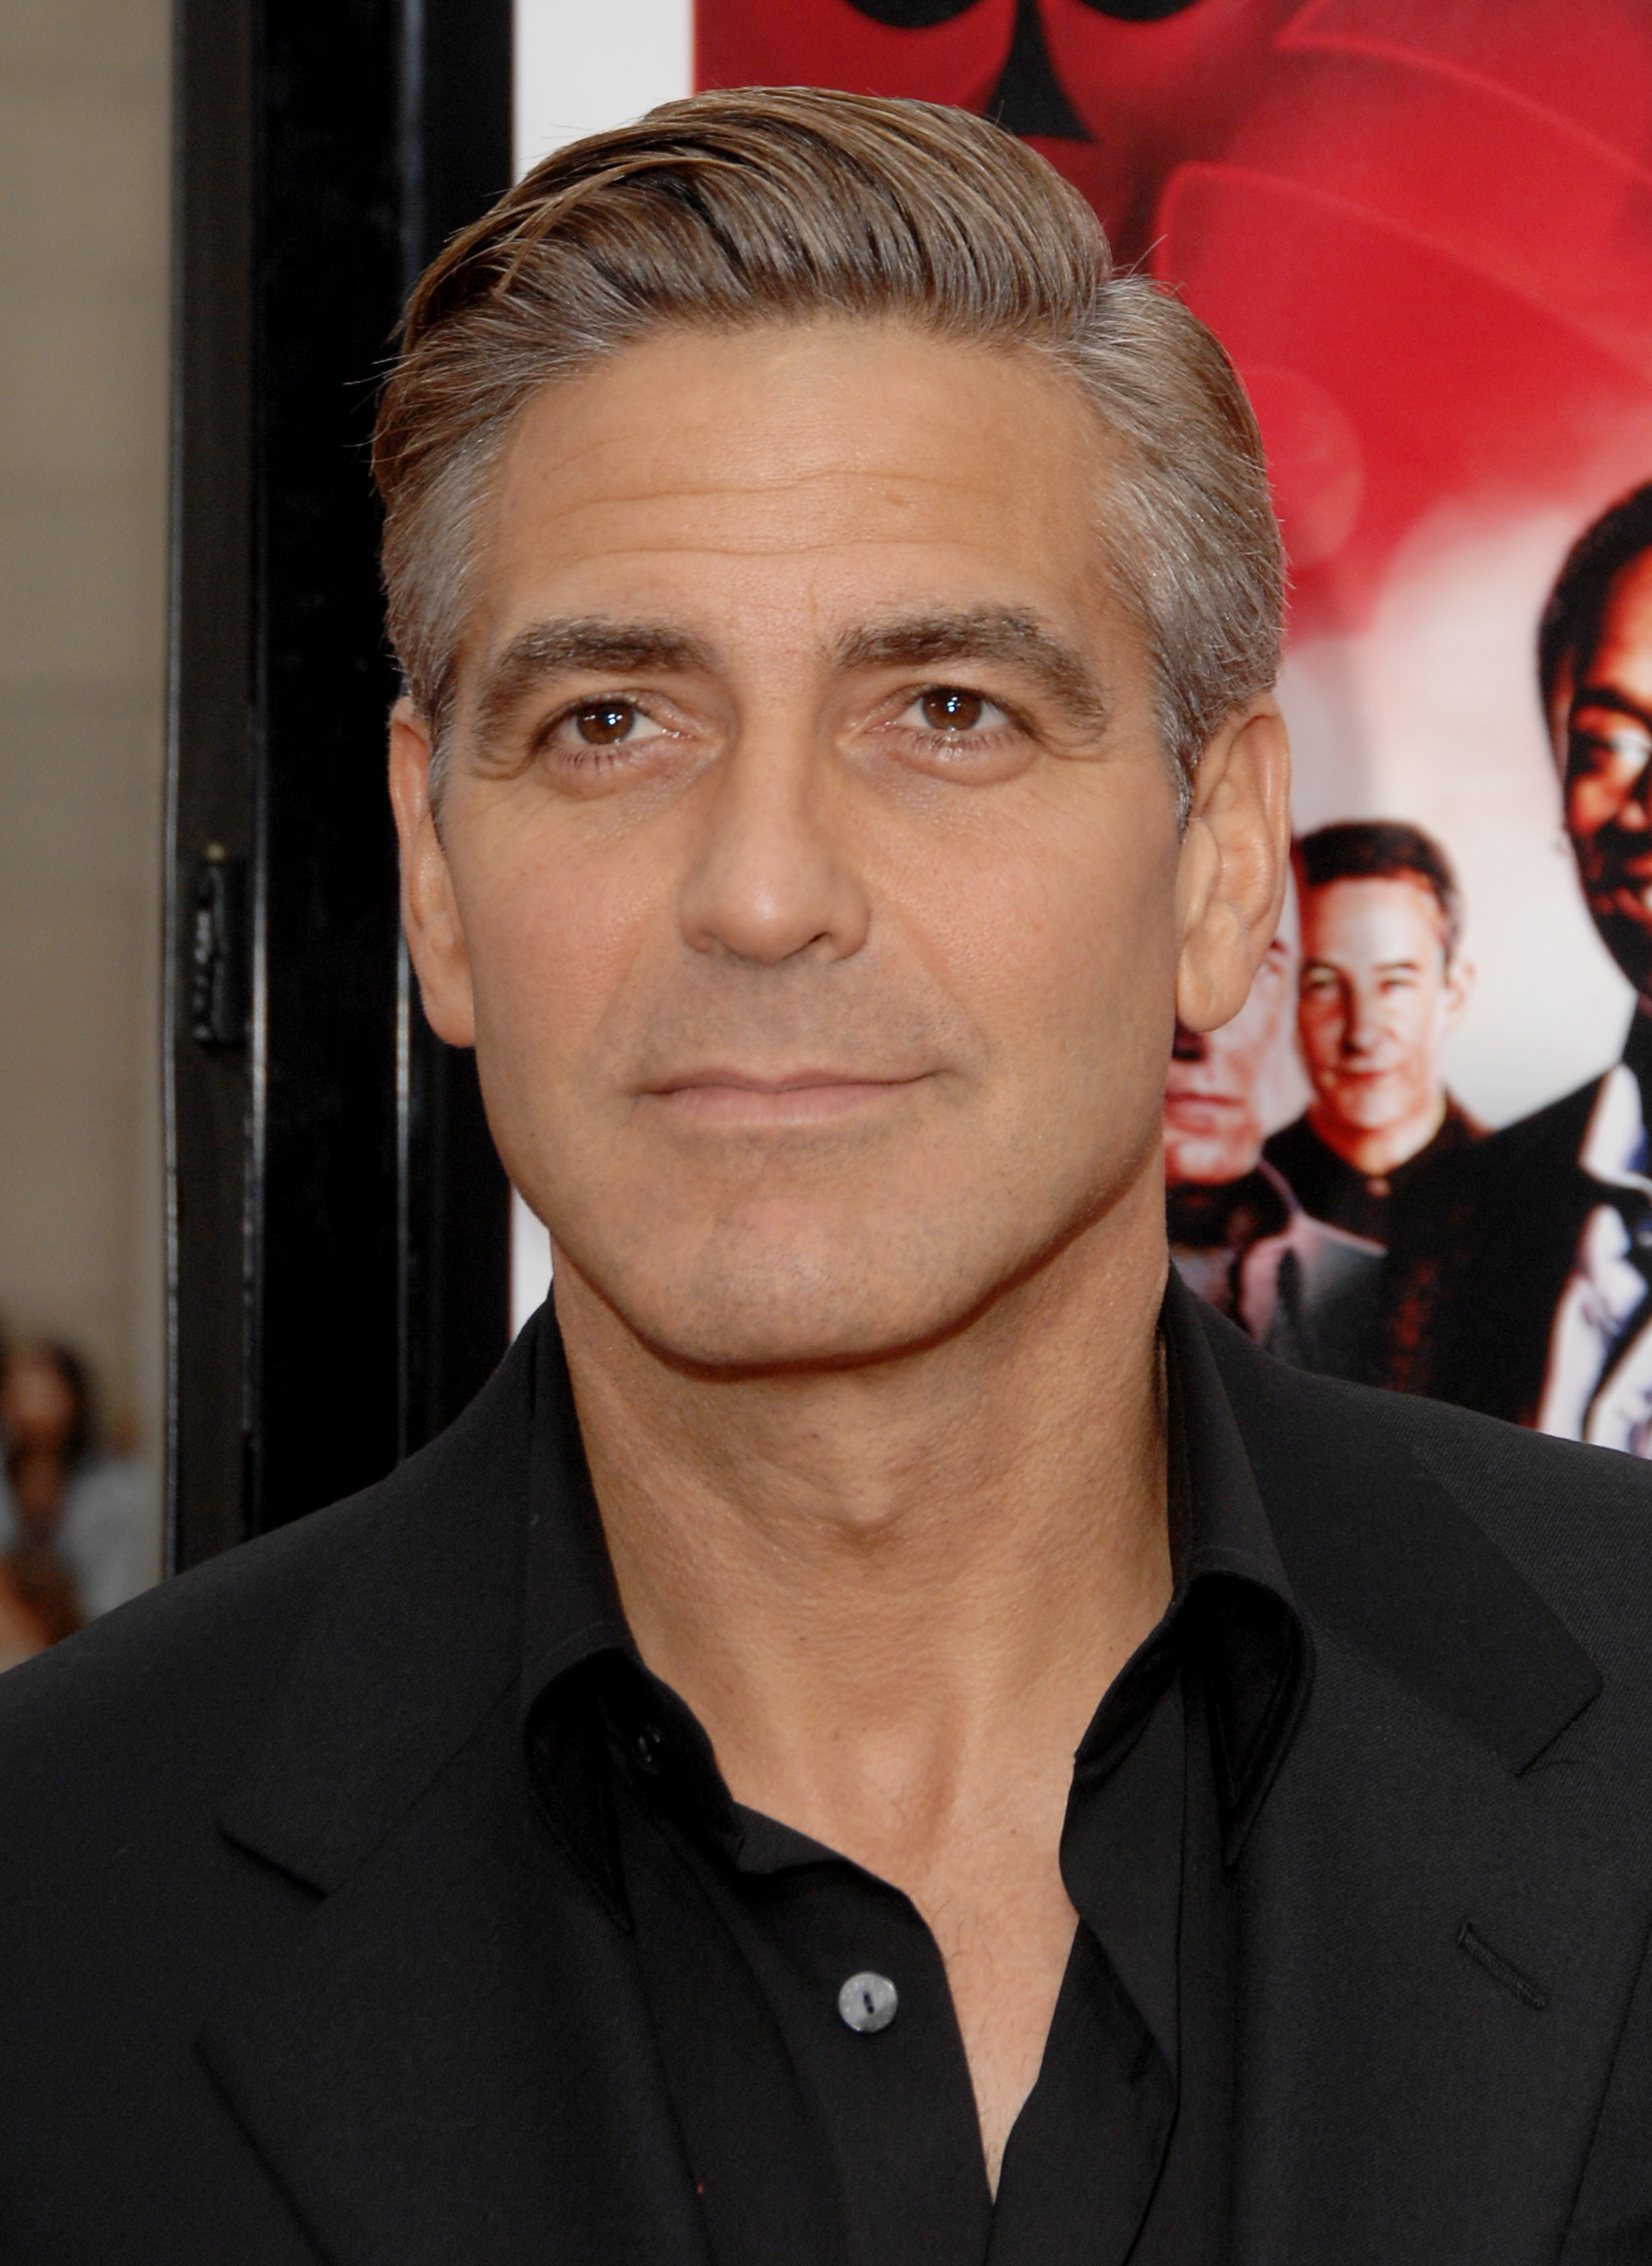 George Clooney wearing a black suit and open collared shirt at a premiere